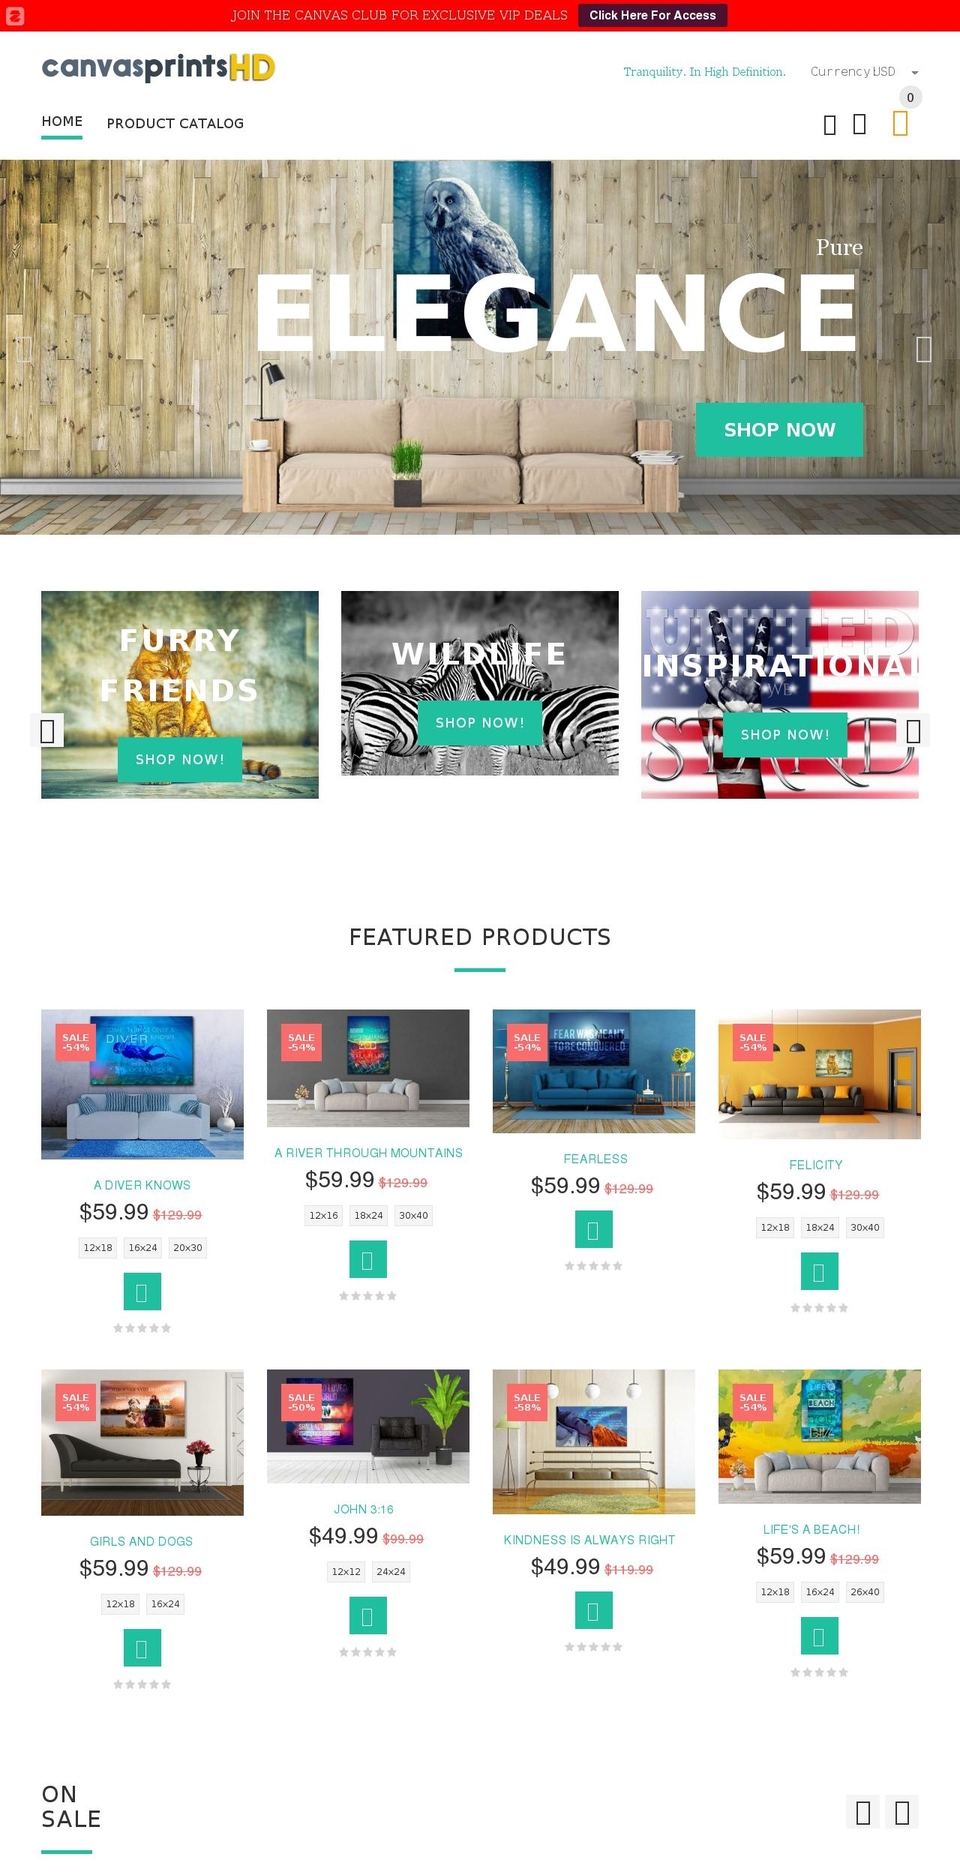 yourstore-v2-1-5 Shopify theme site example canvasprintshd.com